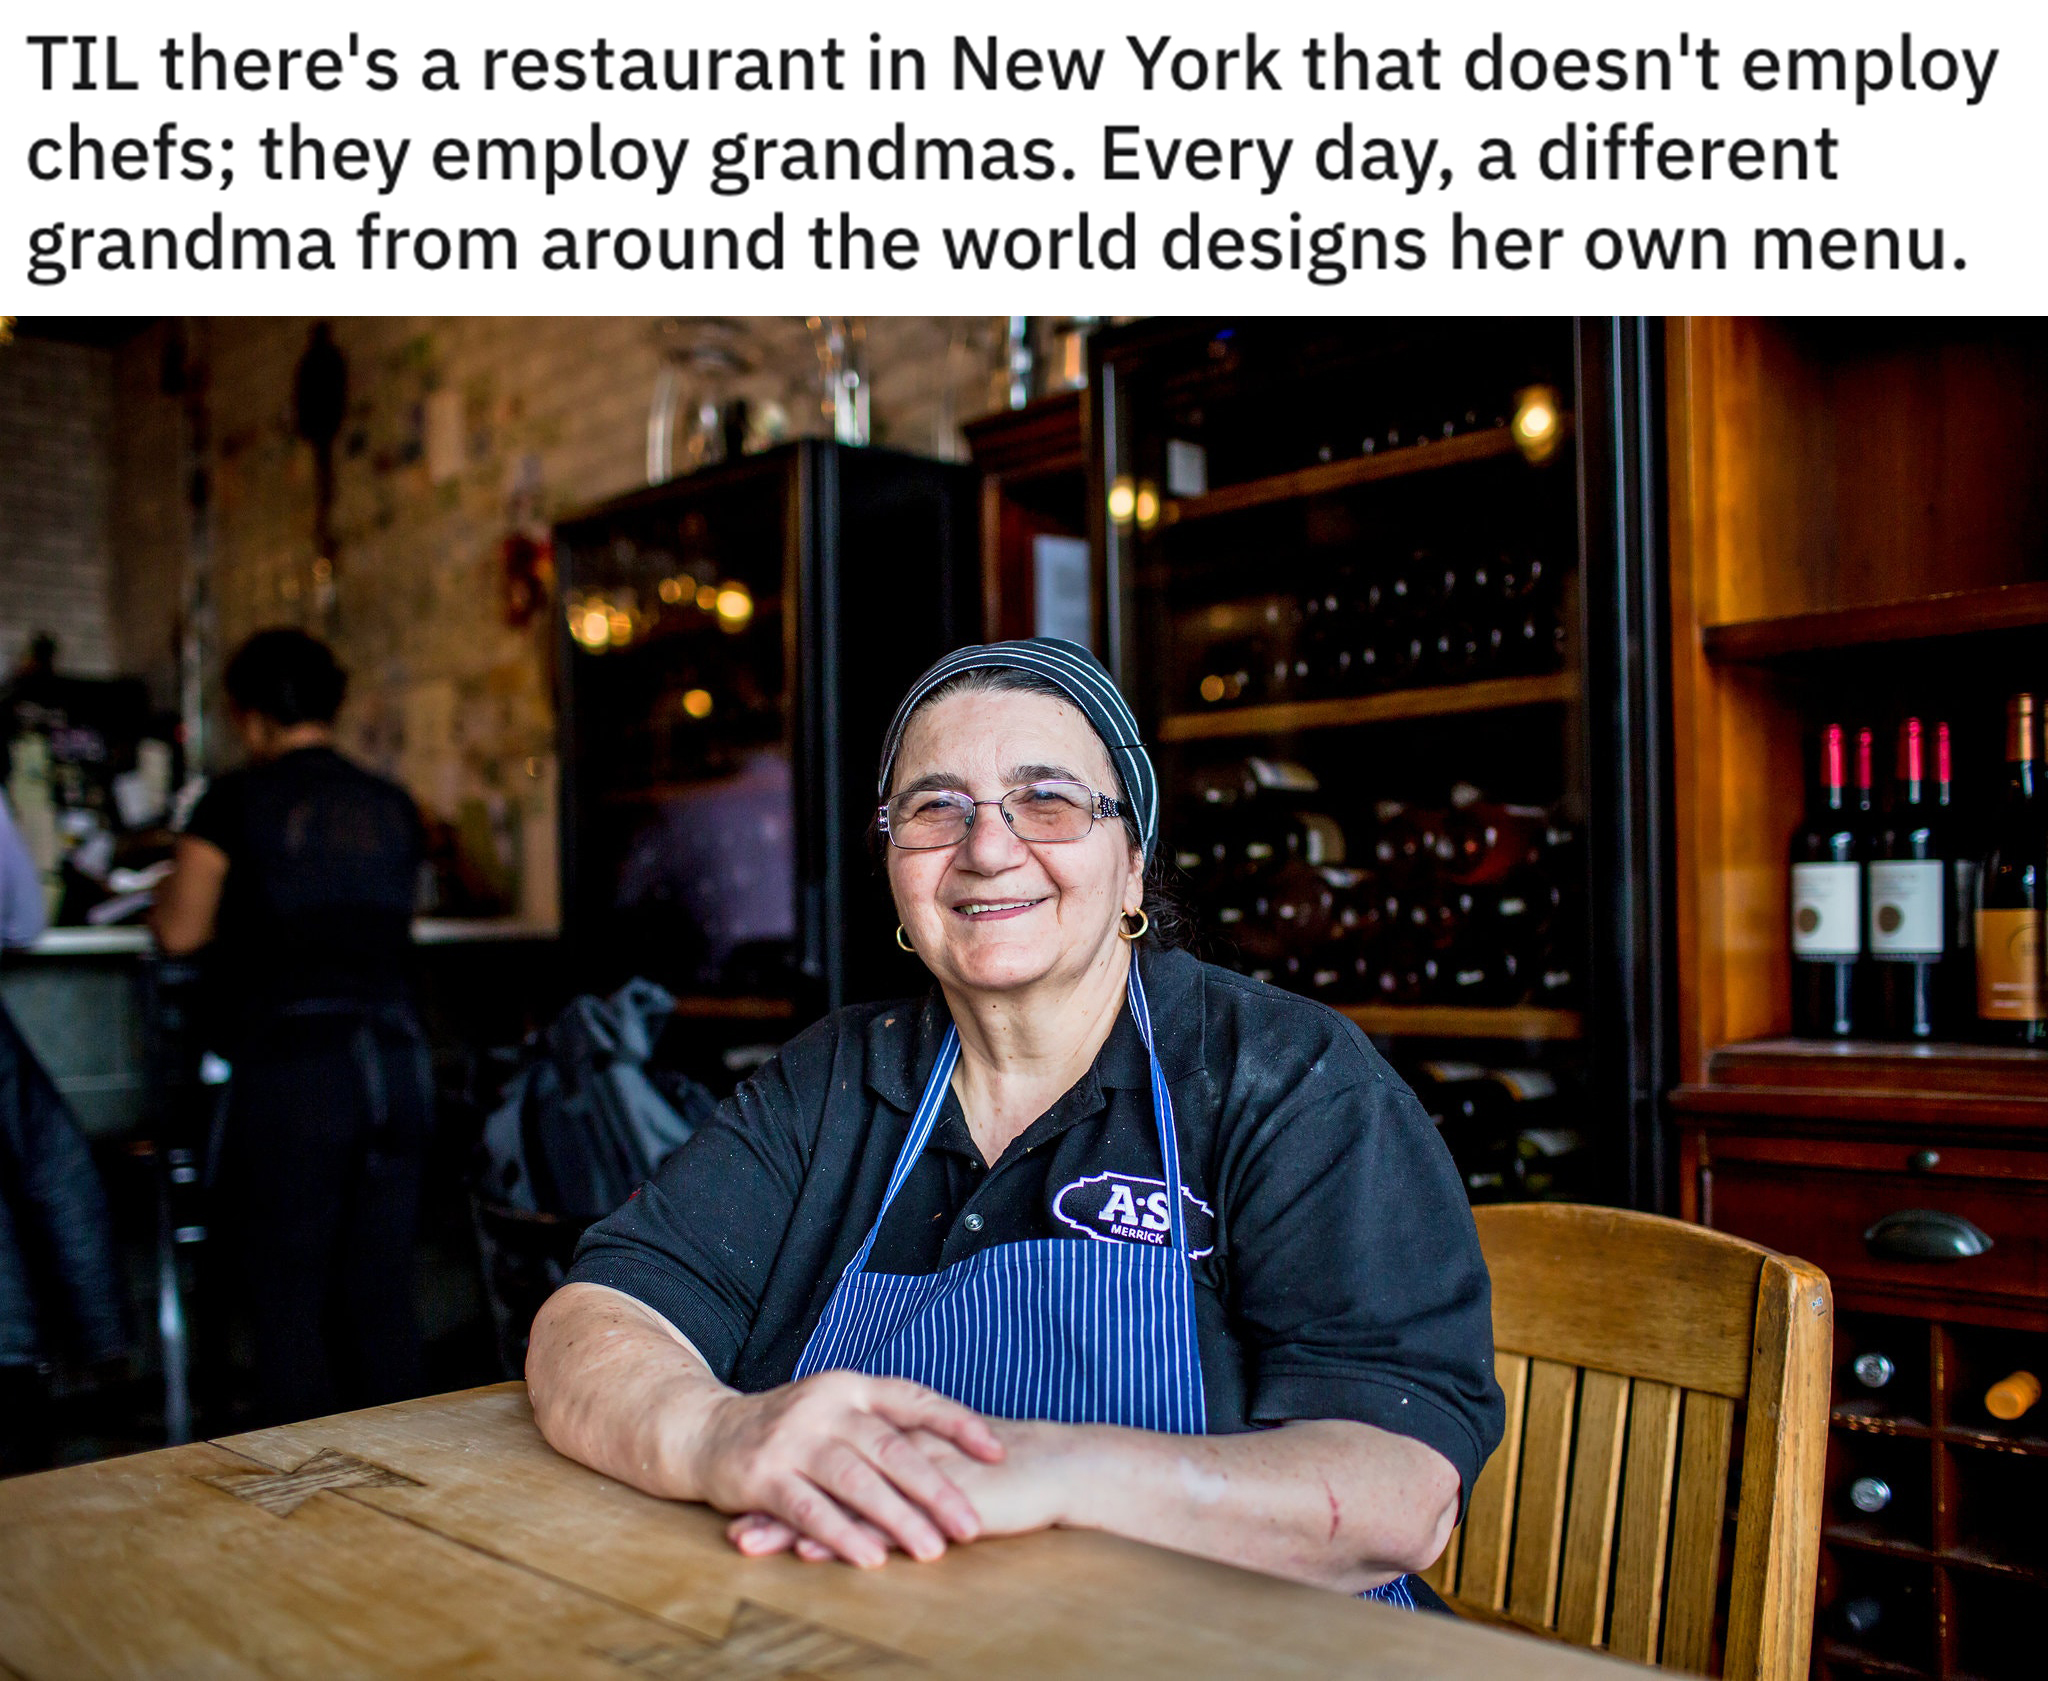 reddit today I learned posts - Til there's a restaurant in New York that doesn't employ chefs; they employ grandmas. Every day, a different grandma from around the world designs her own menu.